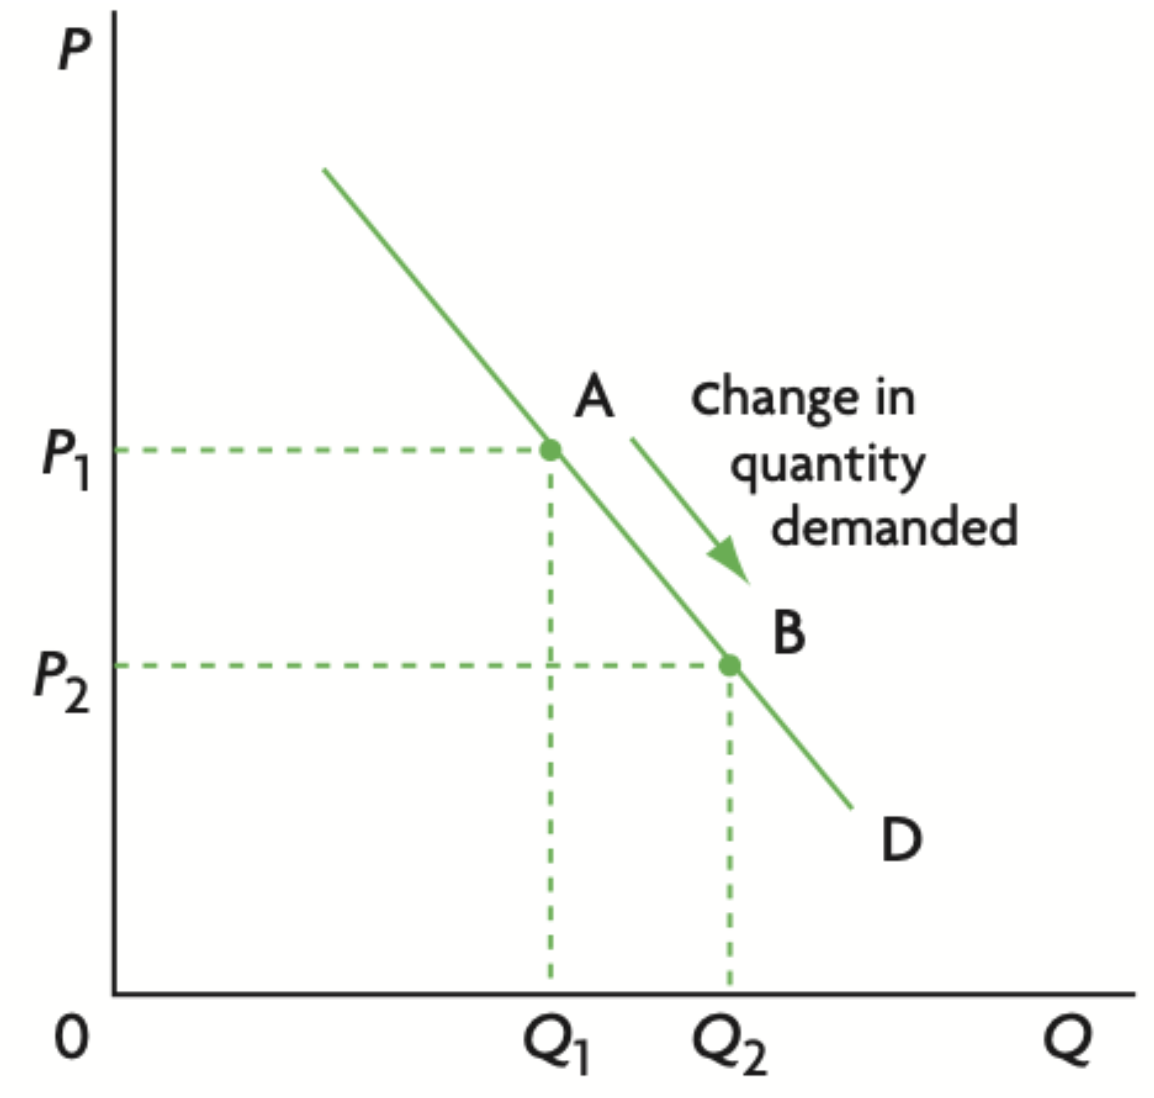 <p><span>Whenever the price of a good changes, ceteris paribus, it leads to a movement along the demand curve. </span></p><p><span>If the price falls from </span><em><span>P</span></em><span>1 to </span><em><span>P</span></em><span>2, the quantity of the good demanded increases from </span><em><span>Q</span></em><span>1 to </span><em><span>Q</span></em><span>2</span></p>